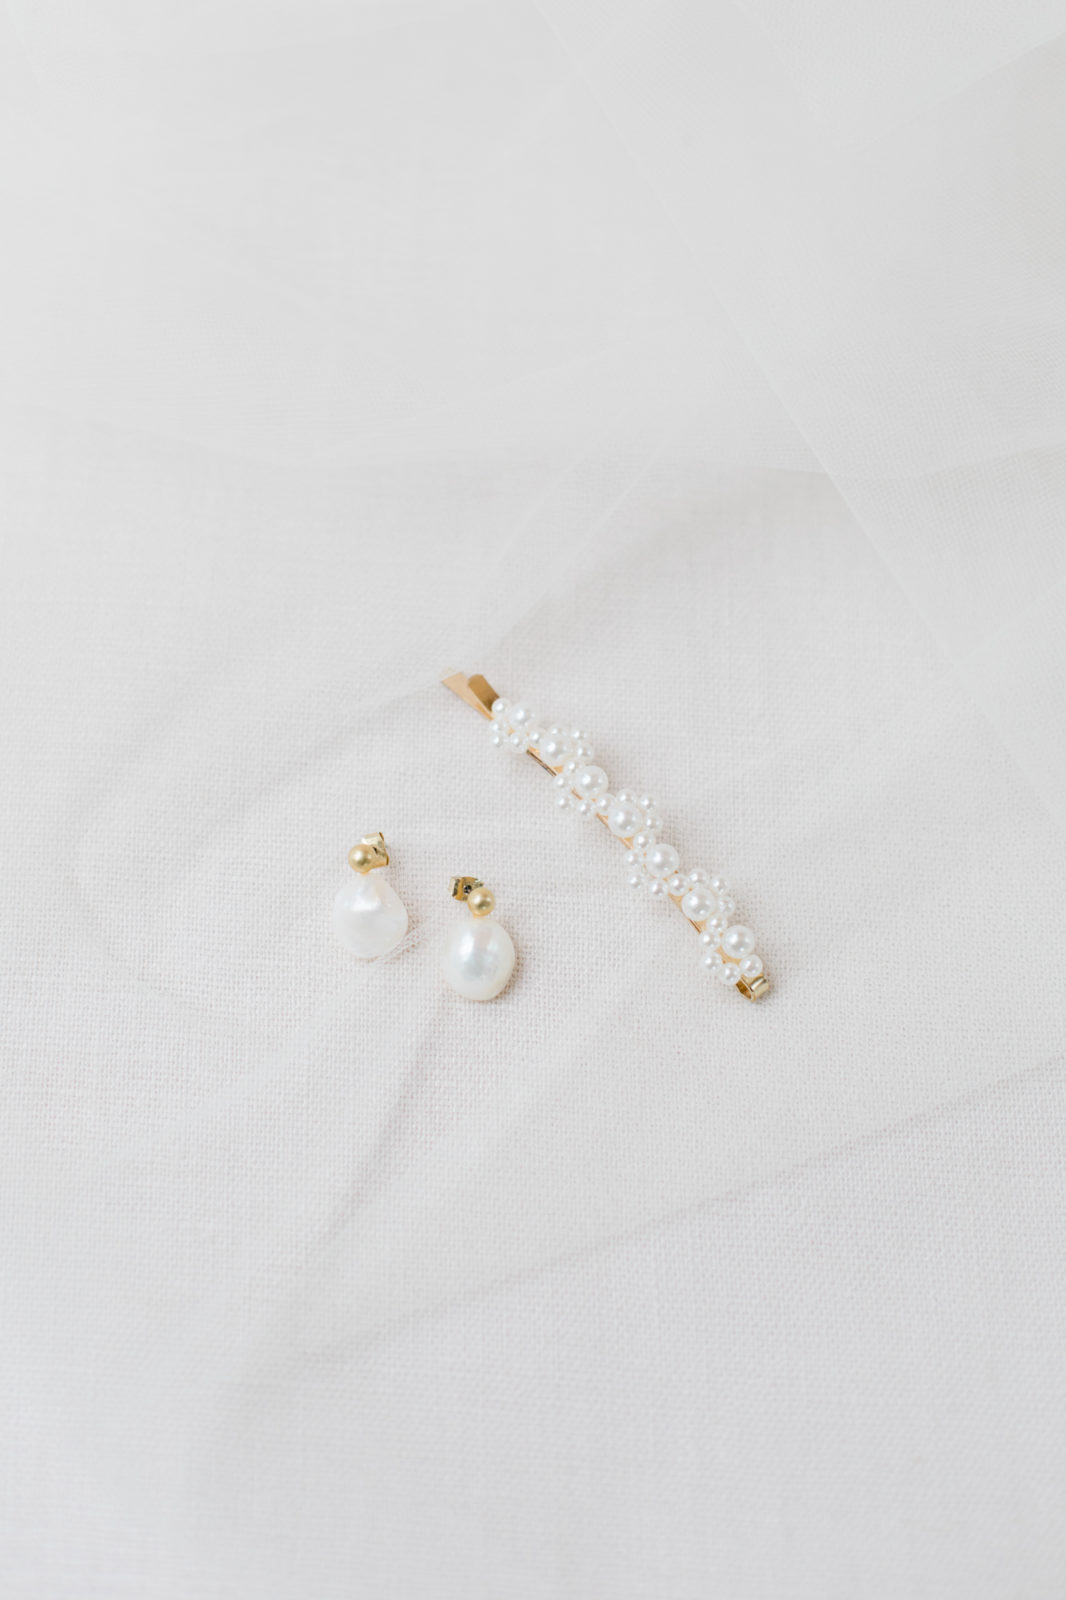 Classic pearl bridal jewelry and accessories